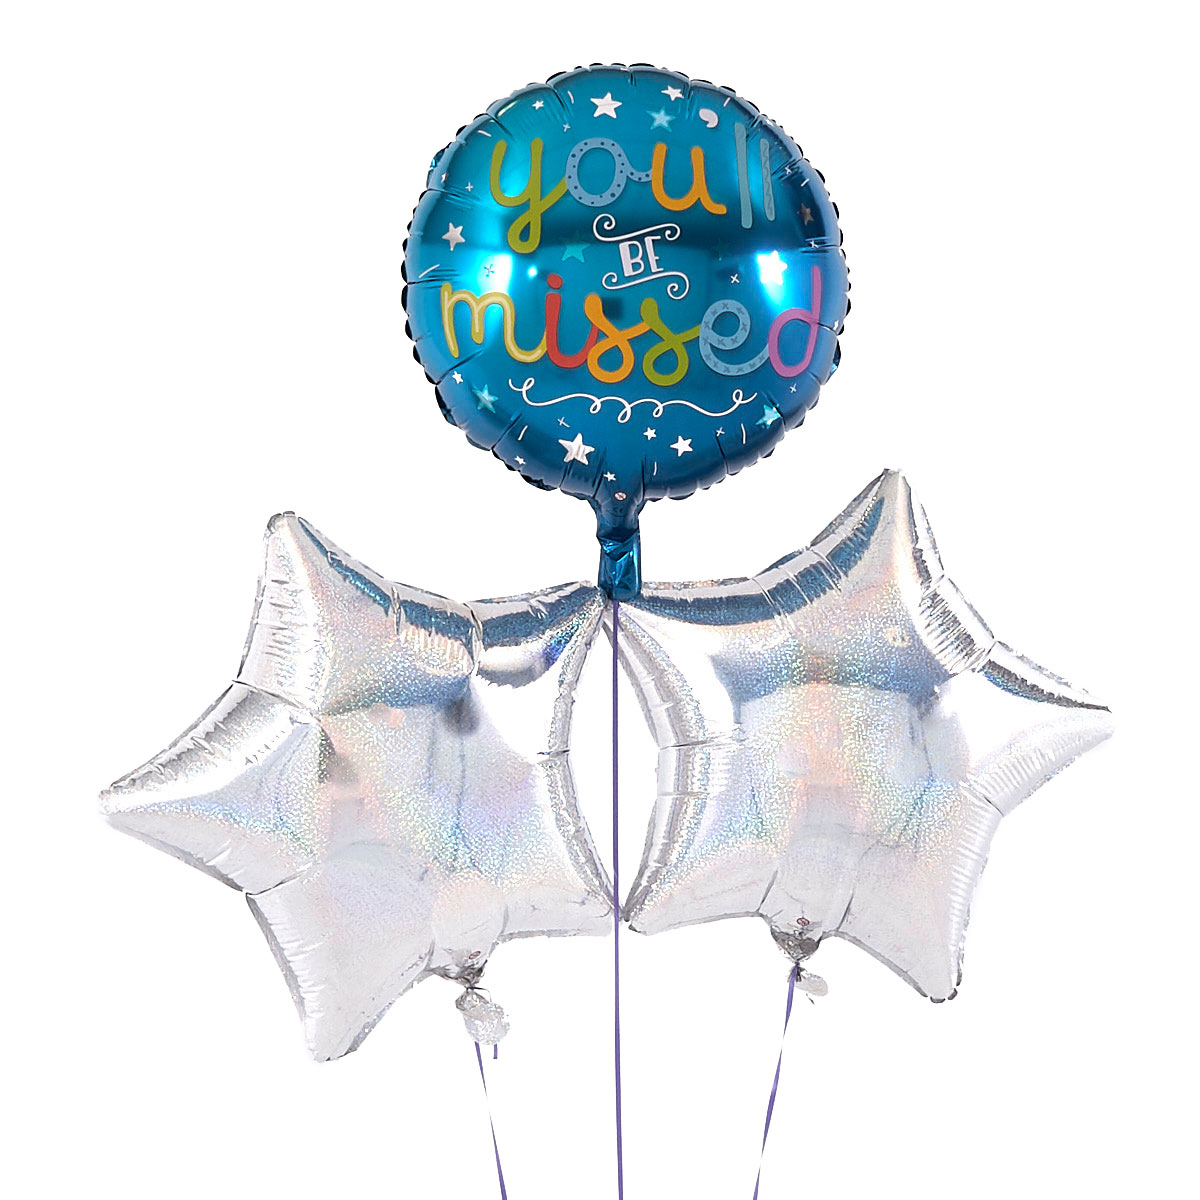 You'll Be Missed Blue & Silver Balloon Bouquet - DELIVERED INFLATED!